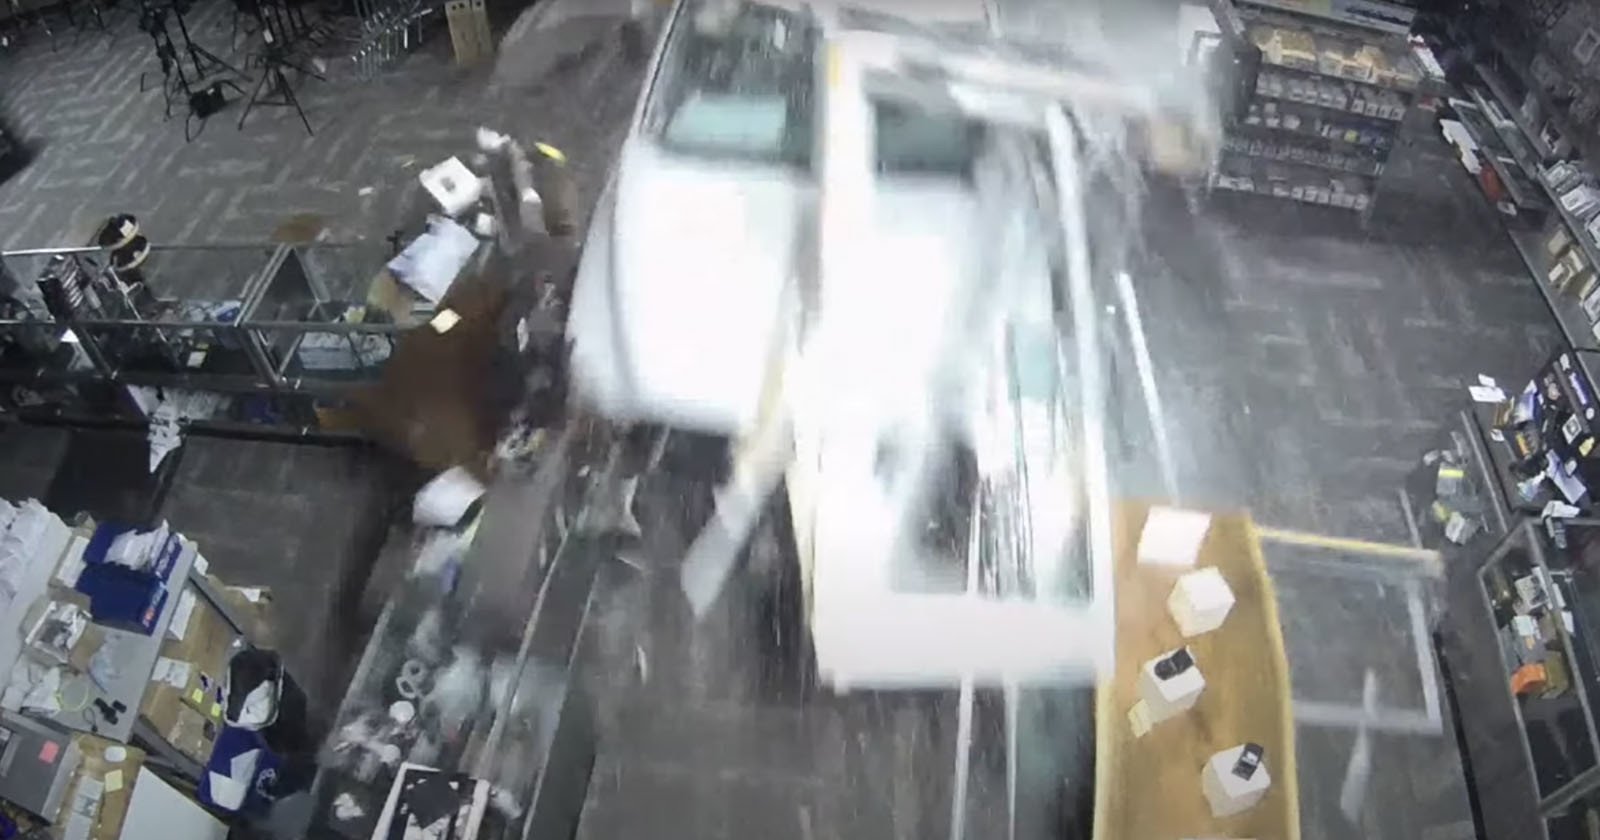 Truck Smashes Through Photo Store Causing $100,000 in Damage